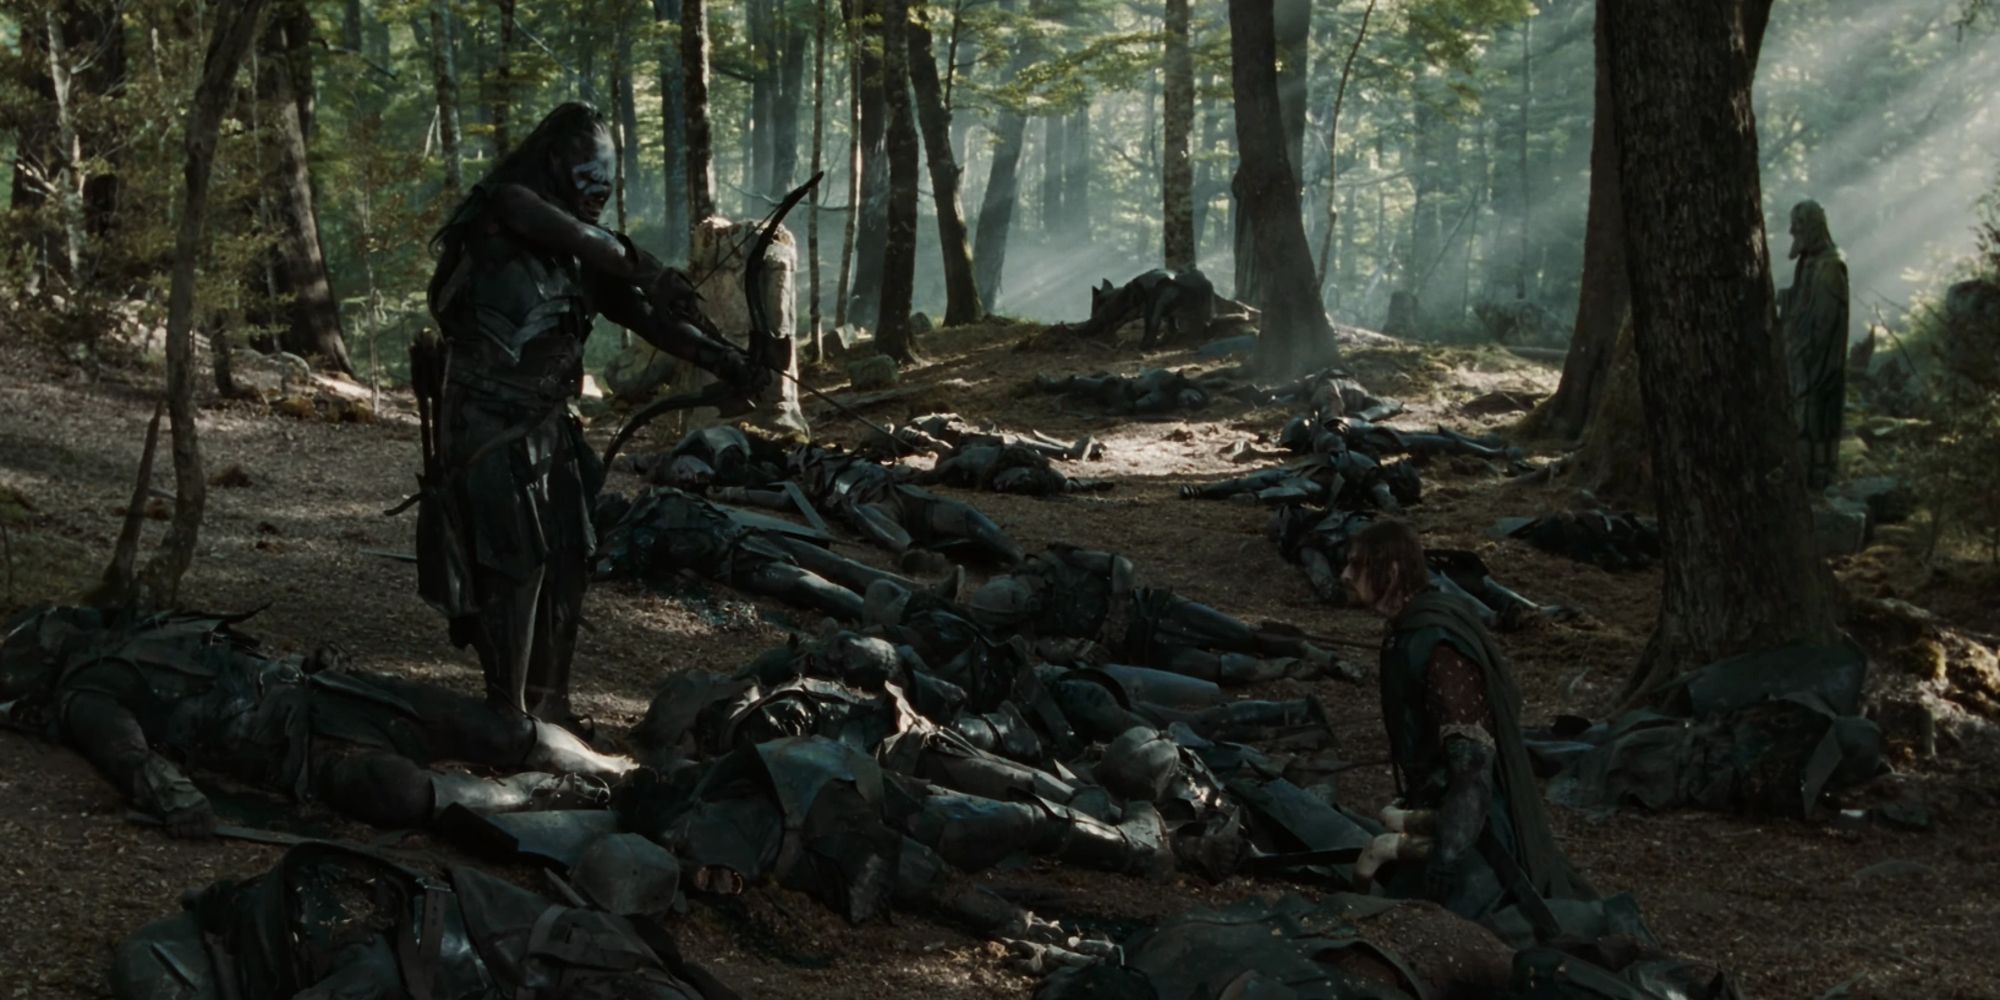 Lurtz taking aim with his bow and arrow at Boromir in Lord of the Rings: Fellowship of the Ring